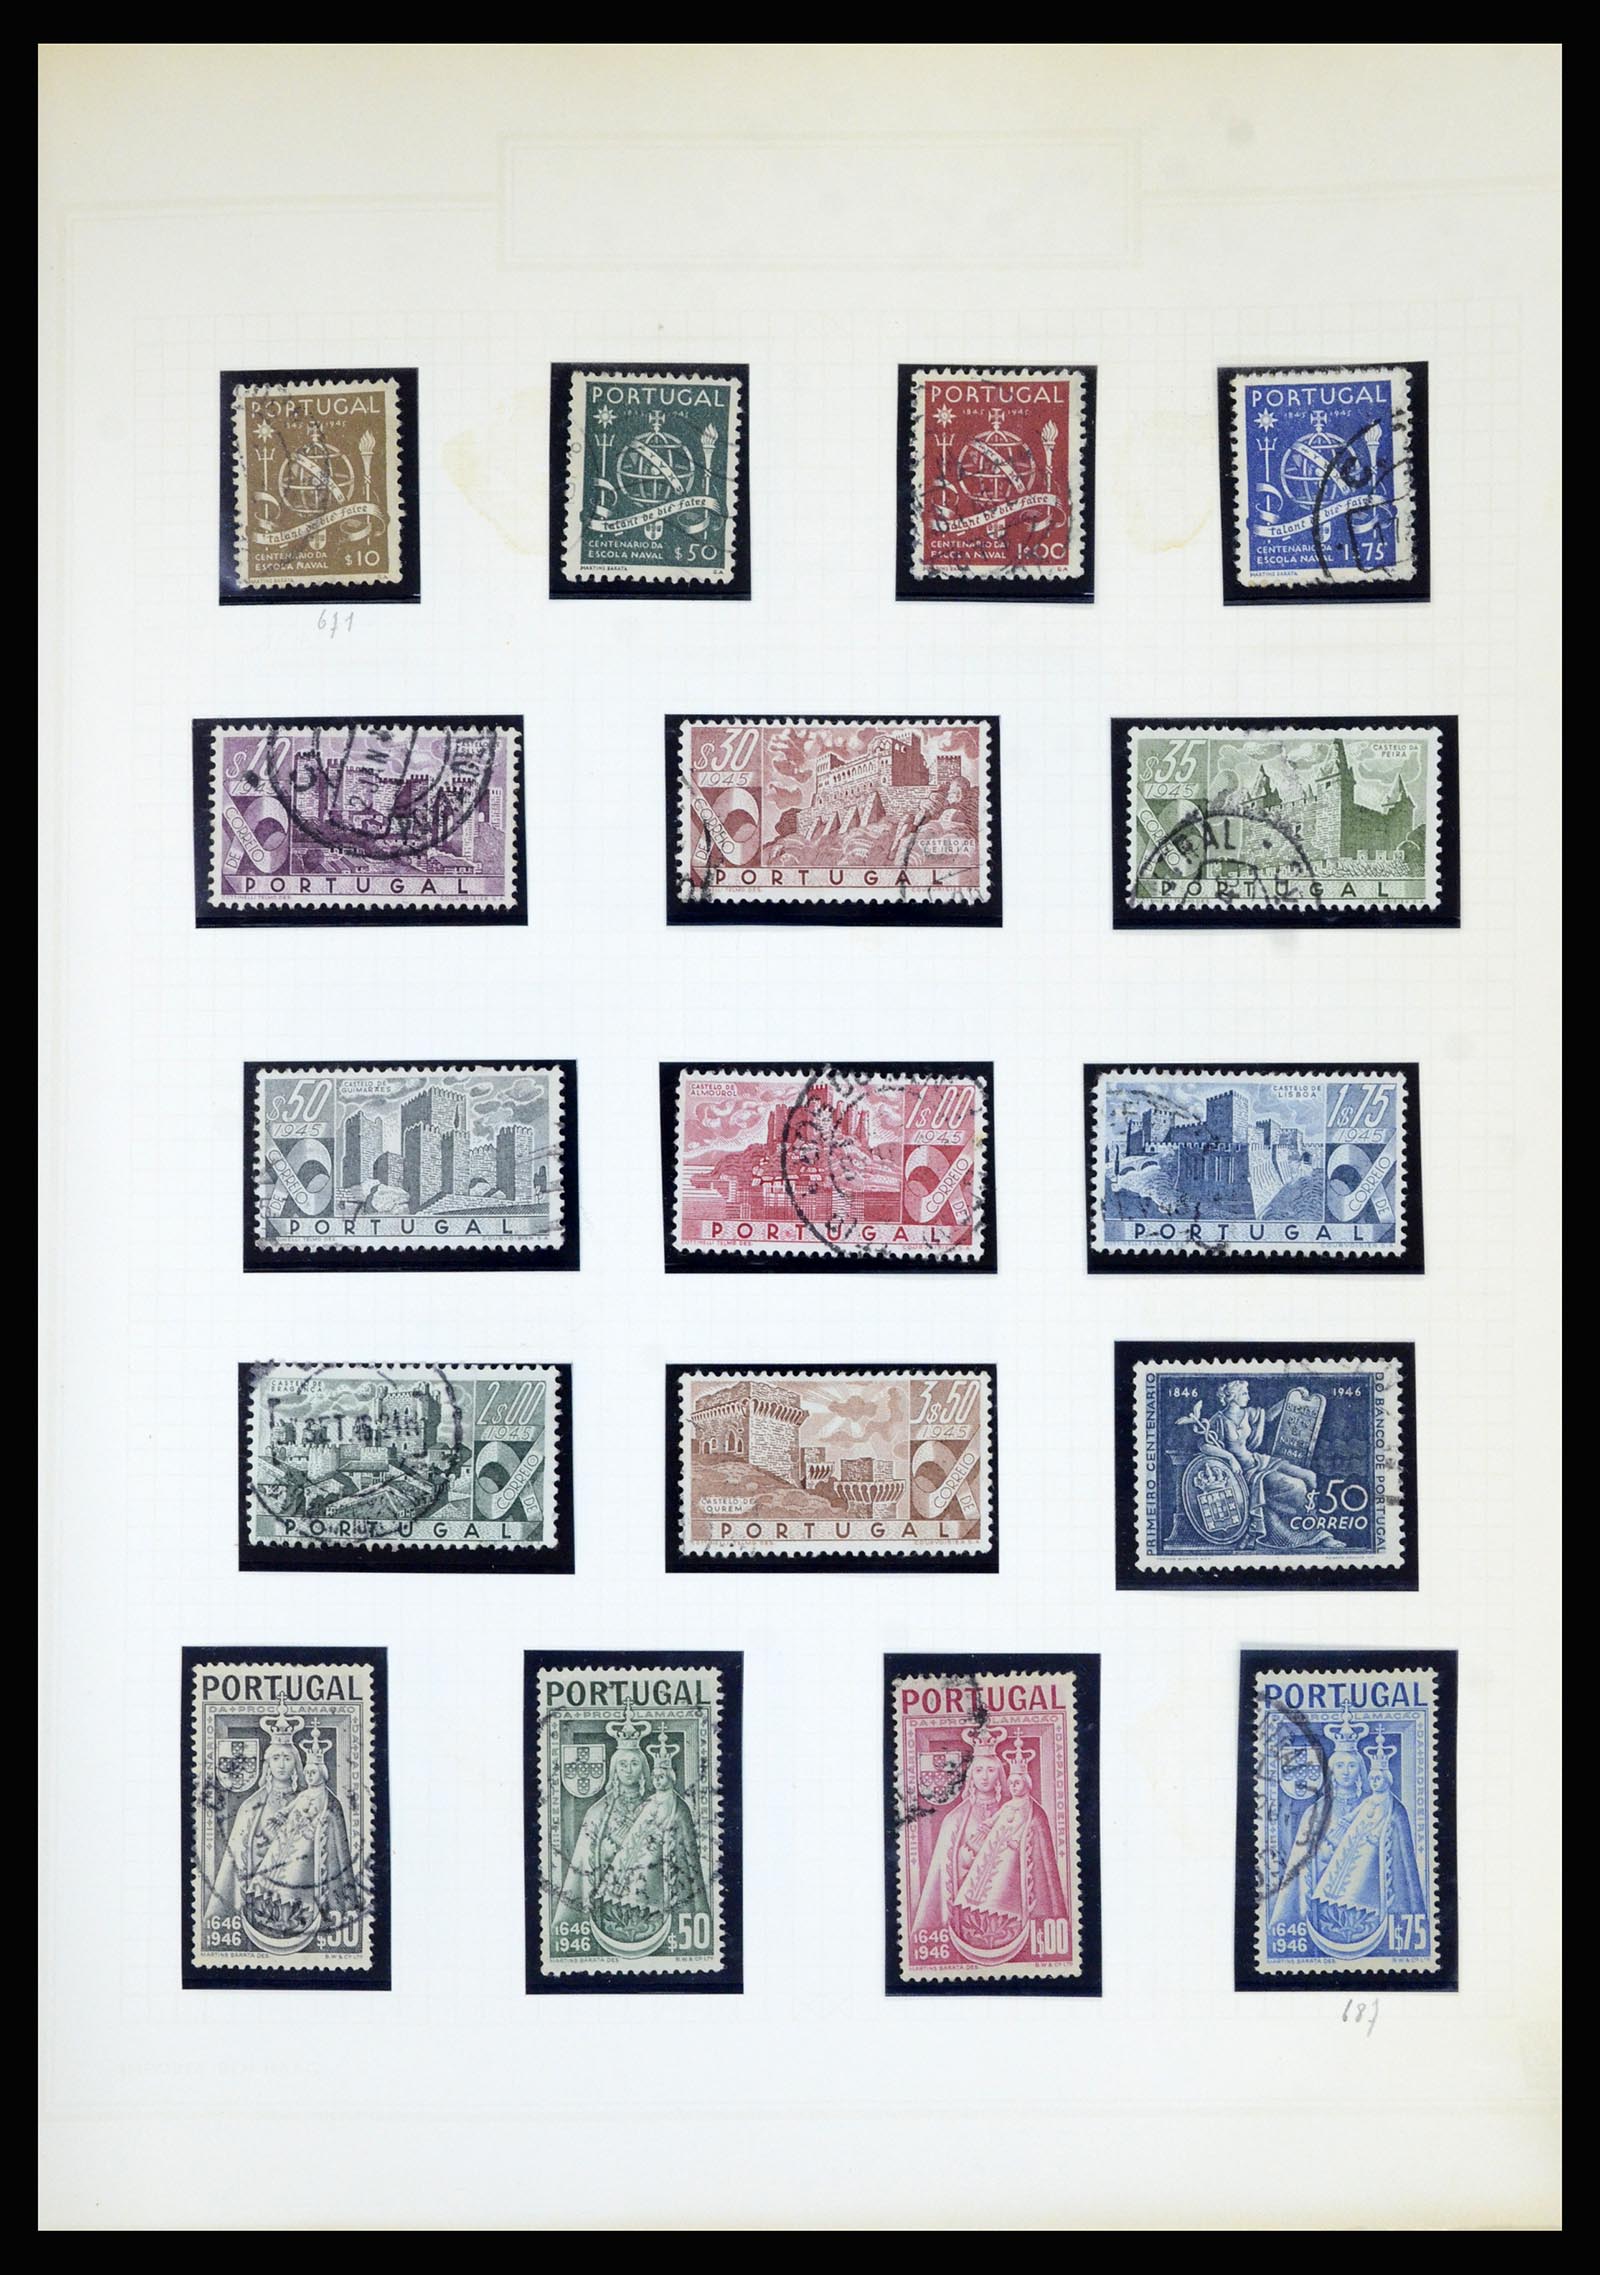 36869 040 - Stamp collection 36869 Portugal 1853-1990.